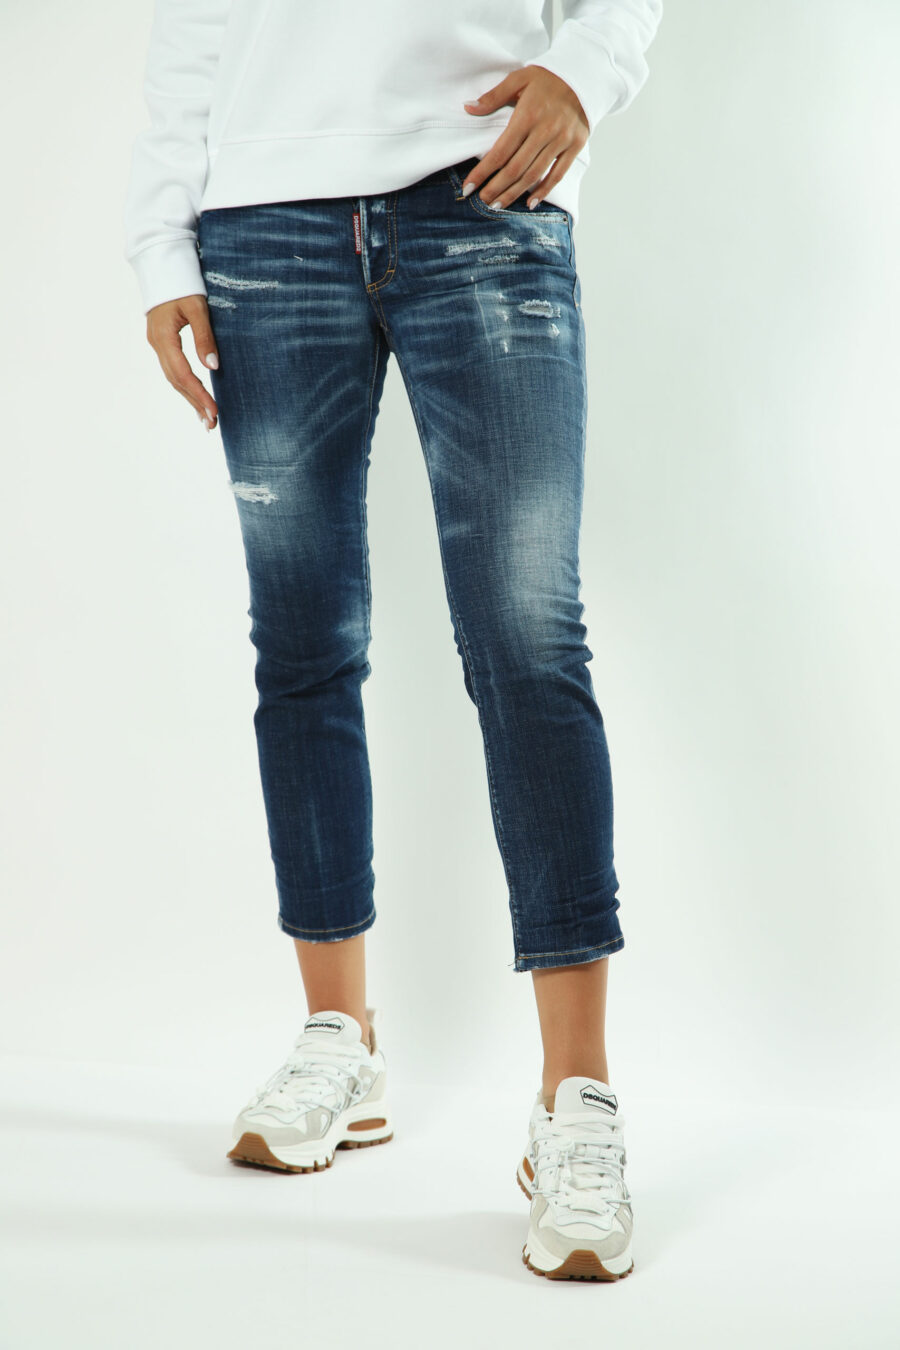 Blue "jennifer cropped jean" trousers with half-rips - Photos 1612